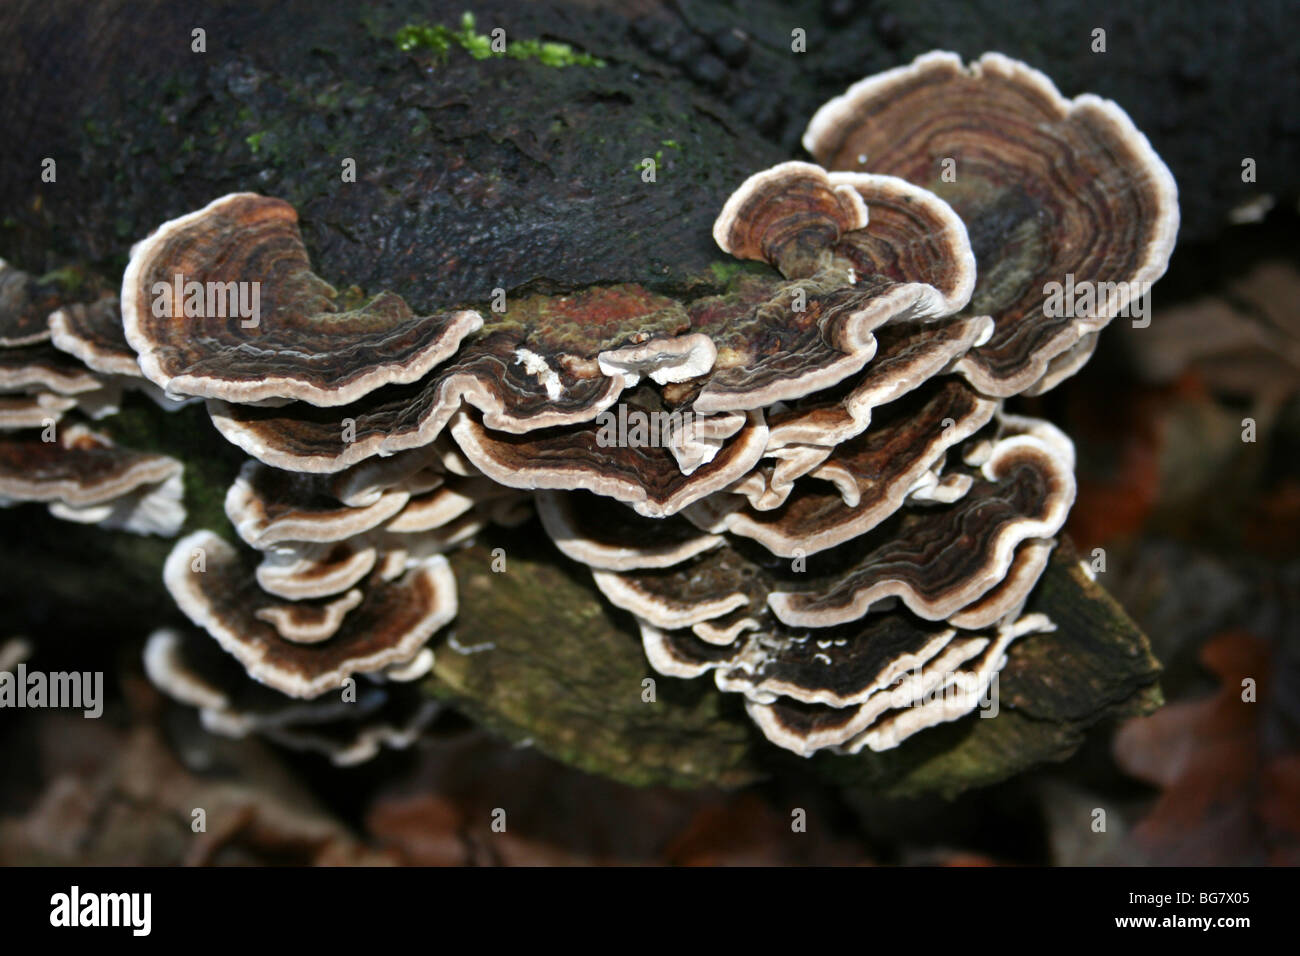 Turkey Tail Trametes versicolor Taken At Eastham Country Park, Wirral, Merseyside, UK Stock Photo